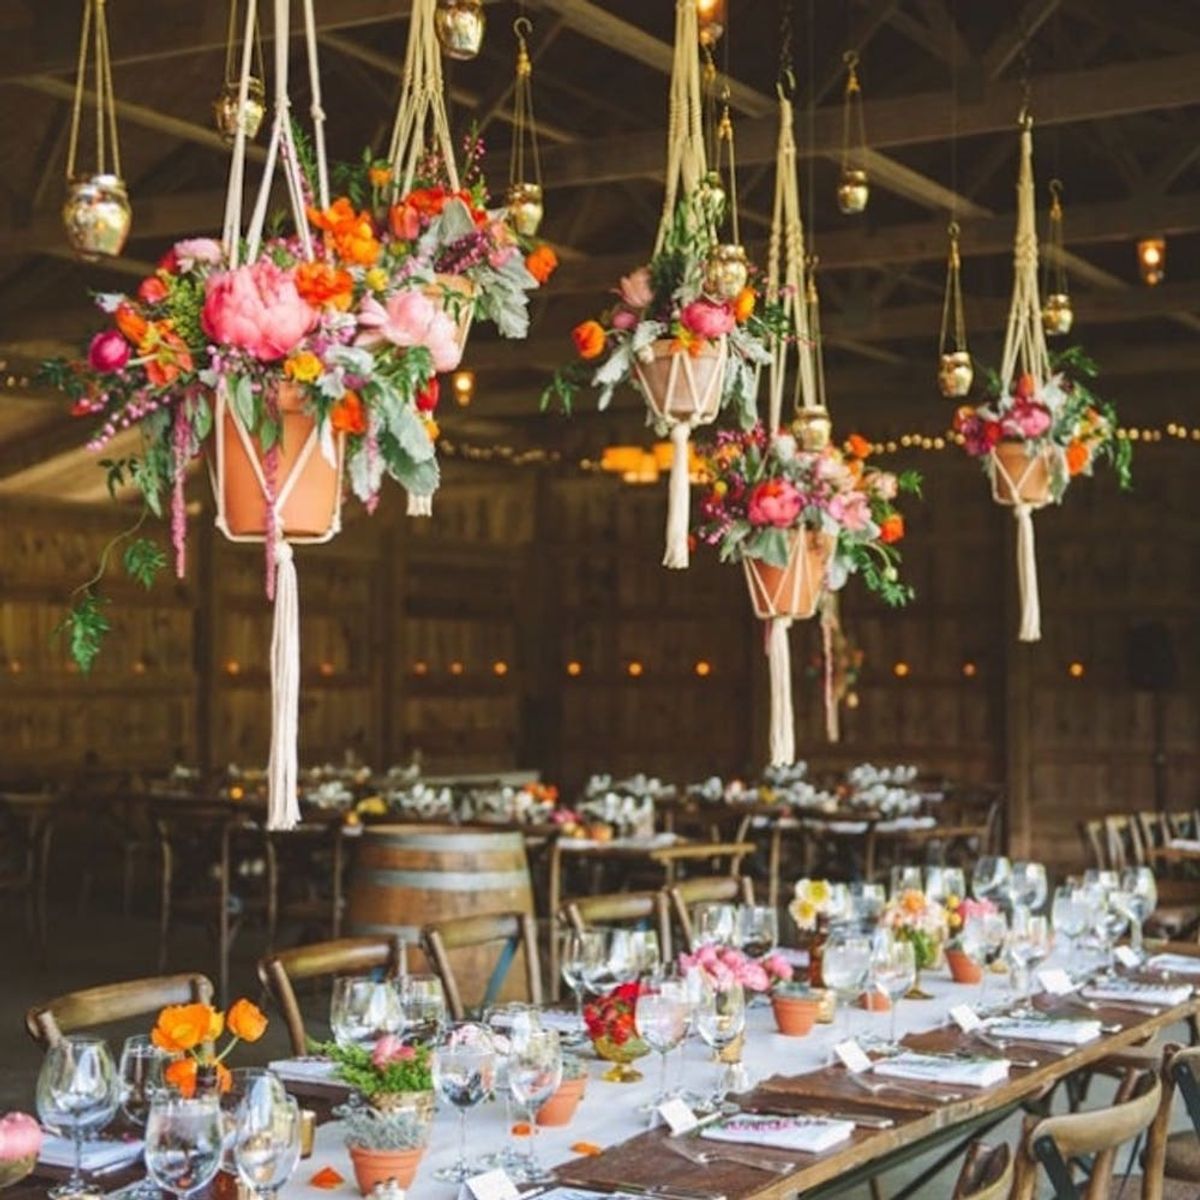 9 Hanging Wedding Centerpieces That Will Take Your Decor to a Whole Other Level